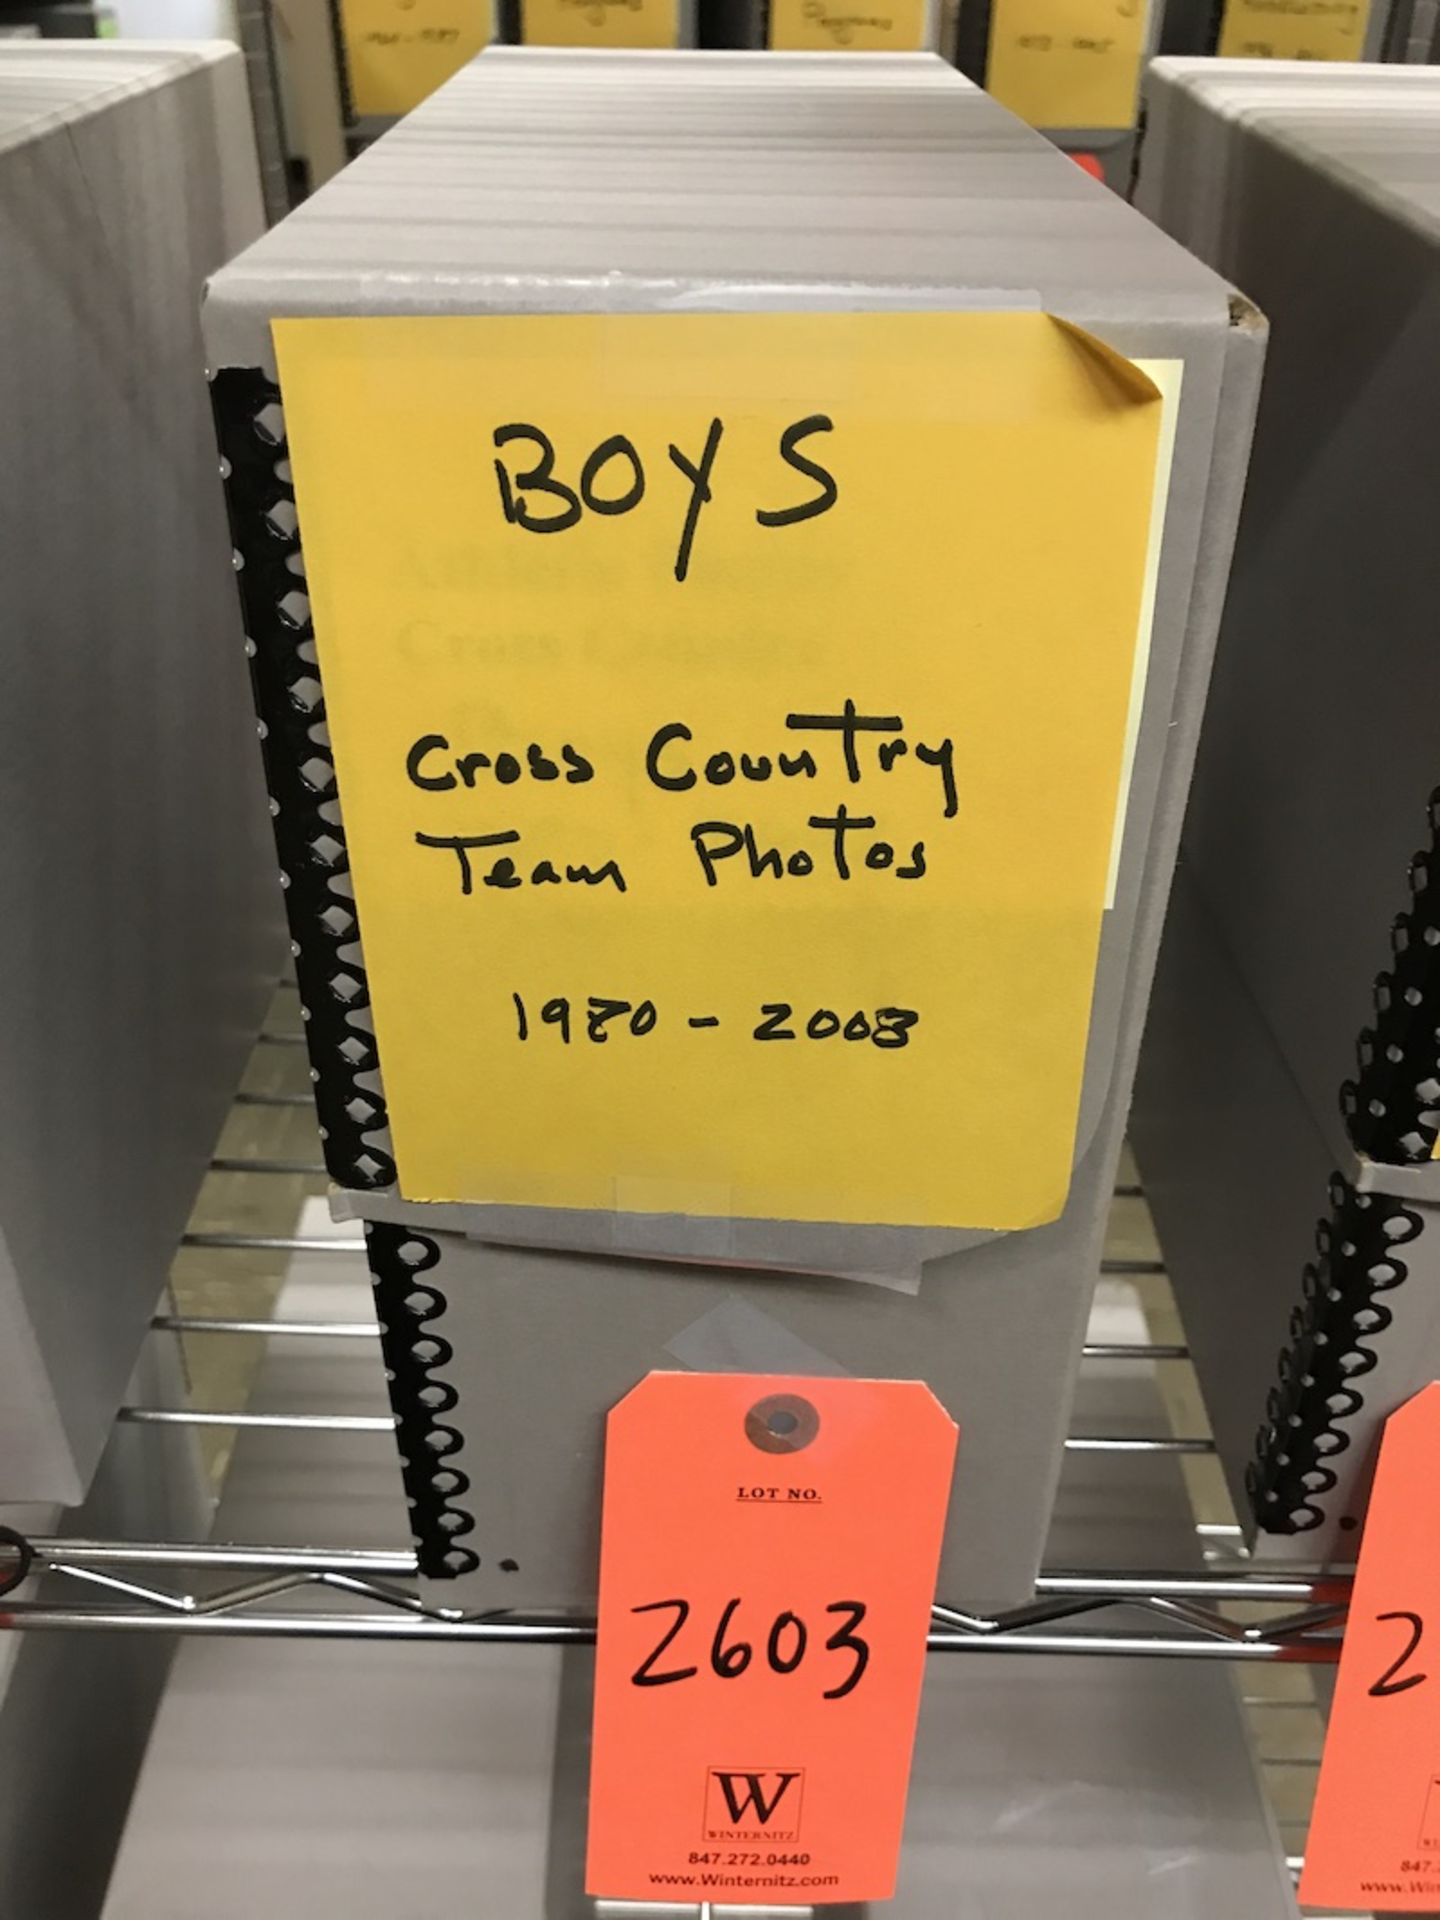 Archive Box with Contents of Boys Cross Country Team Photos 1980-2003 (Room 406)